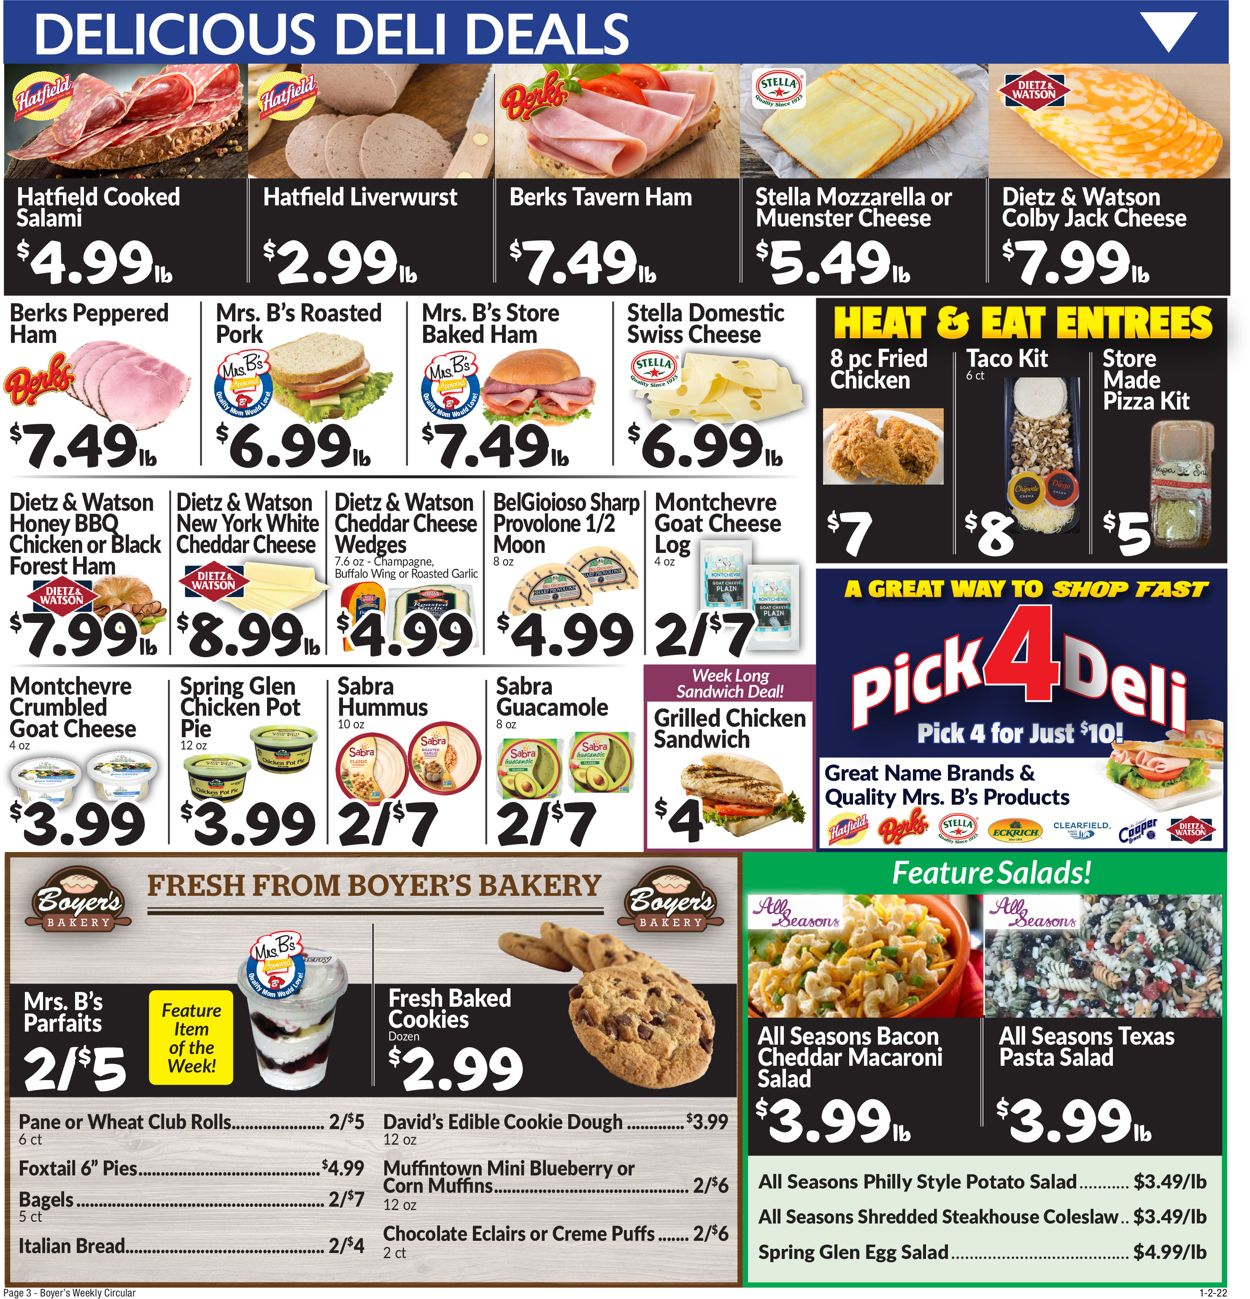 Boyer's Food Markets Ad from 01/02/2022